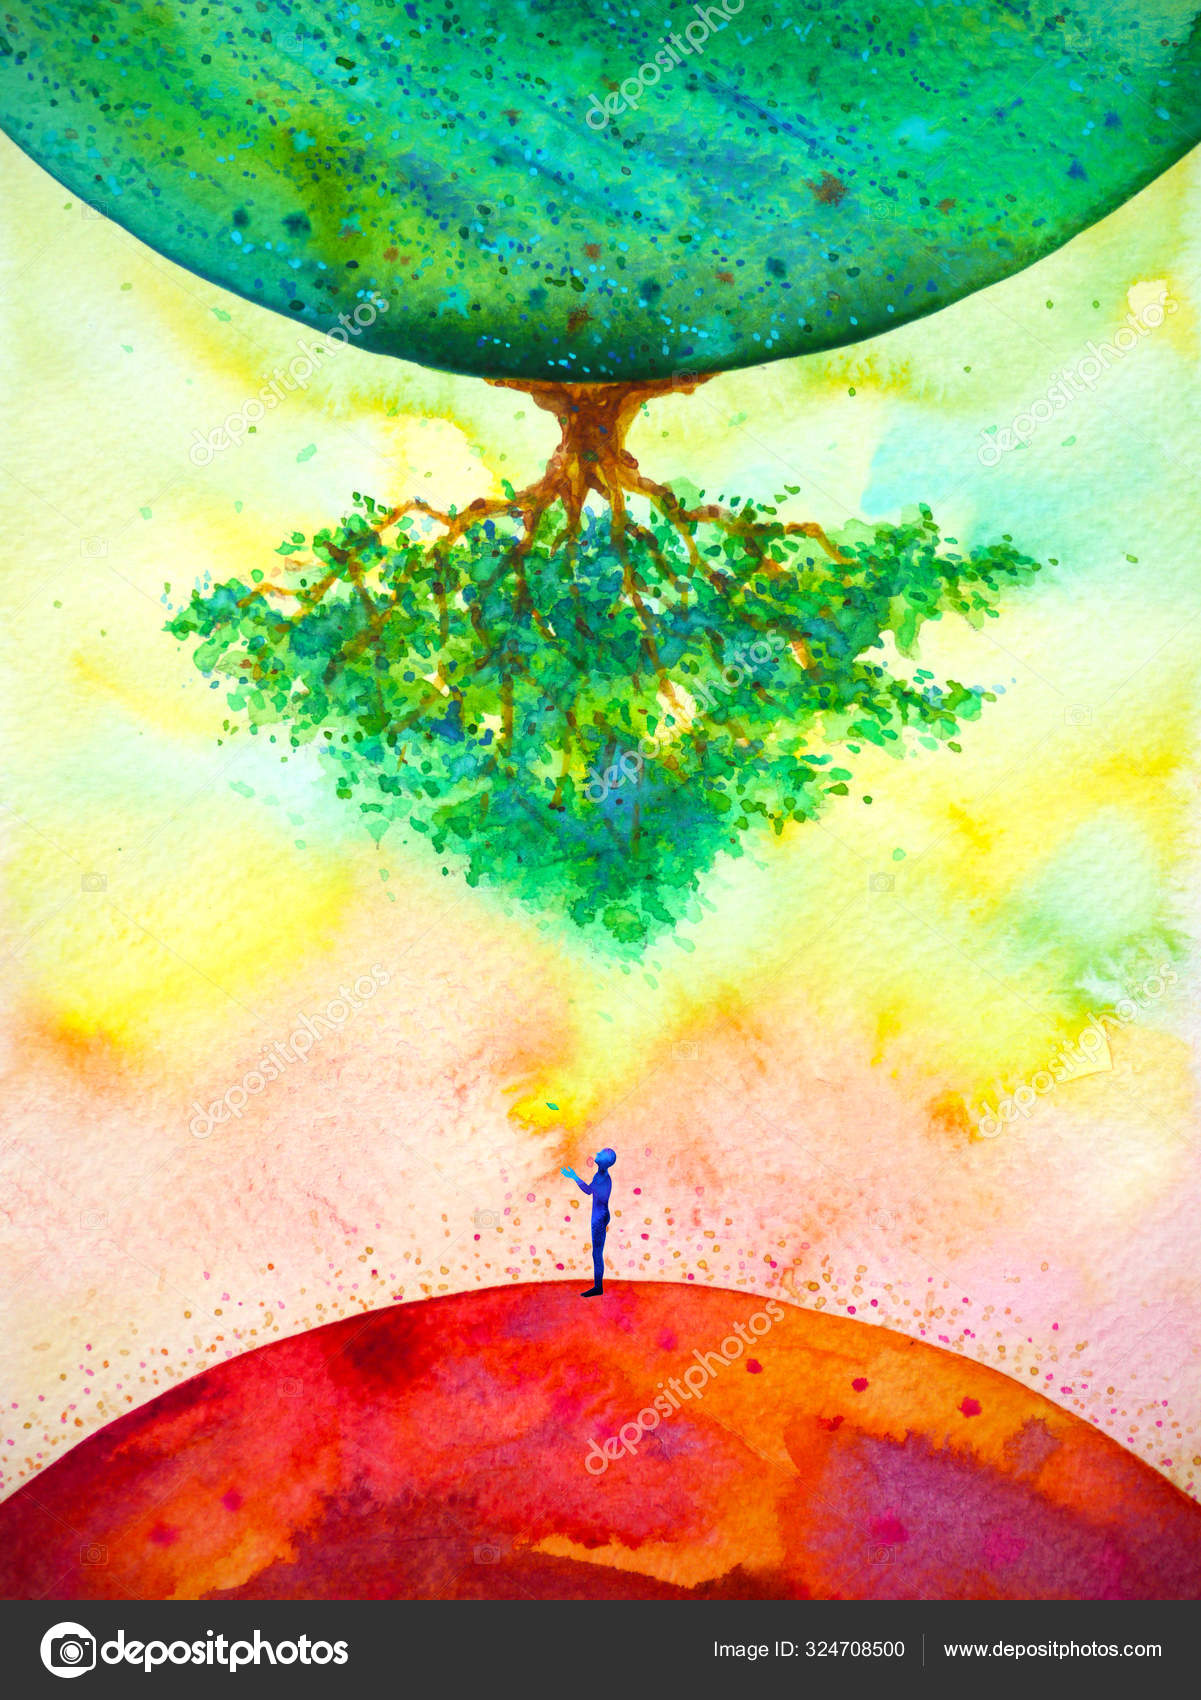 Global Warming Climate Change Abstract Art Spiritual Mind Human Watercolor Painting Illustration Design Hand Drawing Stock Photo By C February Boxroom Gmail Com